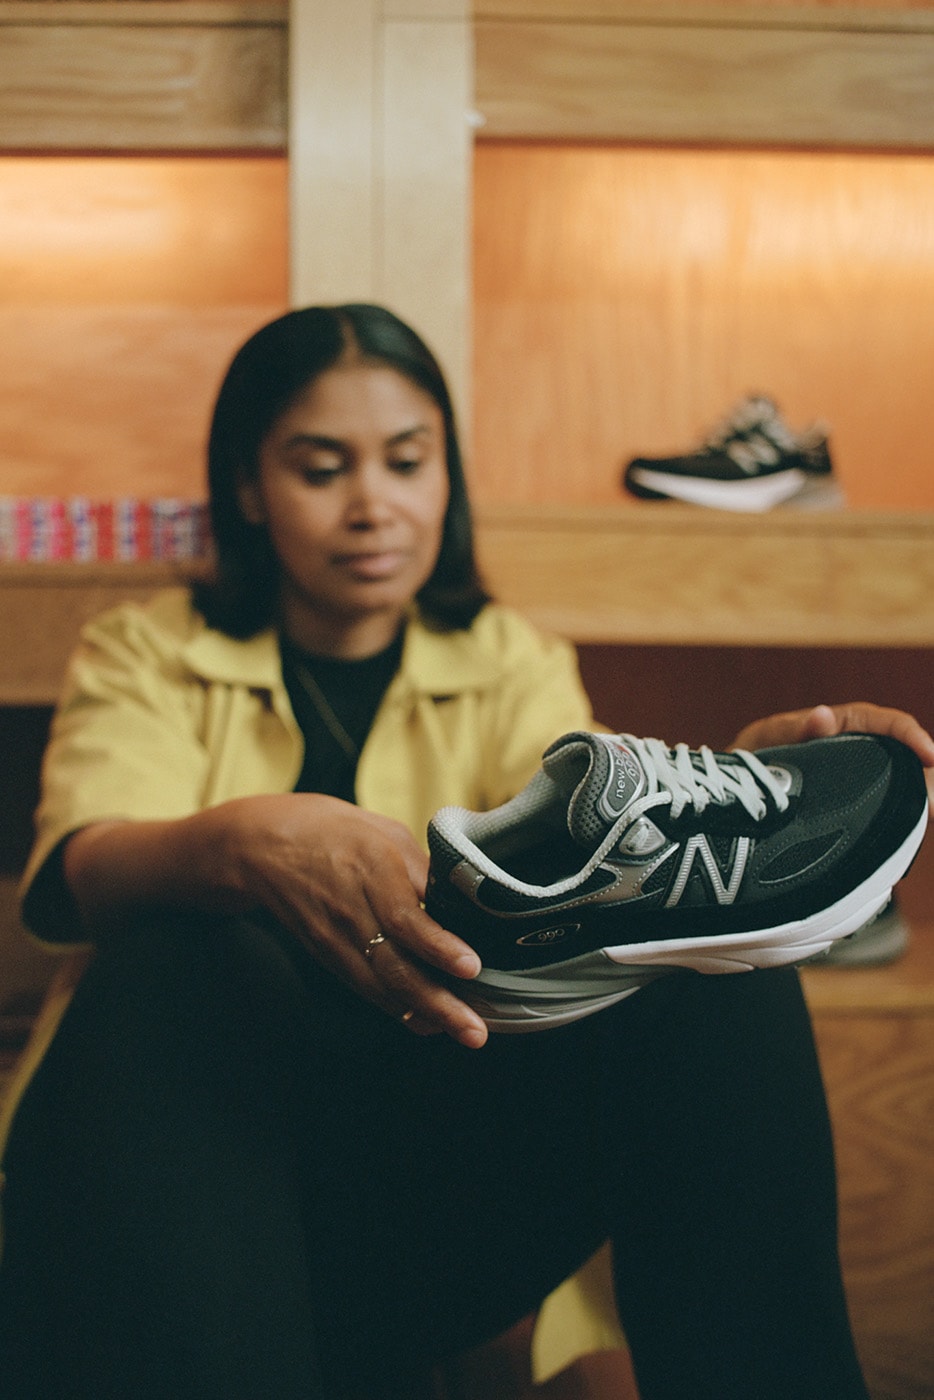 New Balance Sounds of an Icon Gallery and Workshops in Philadelphia